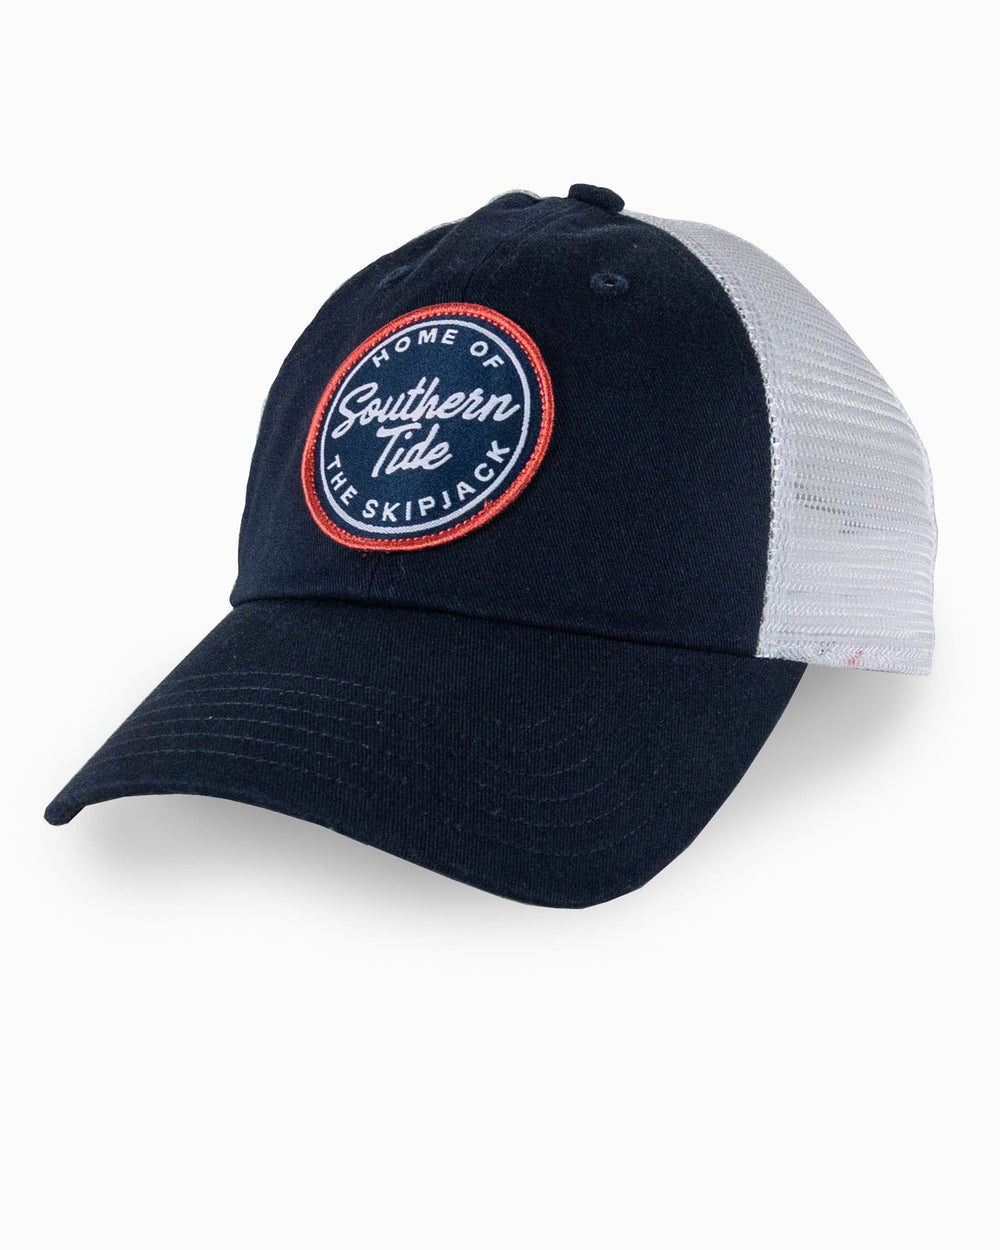 Men's Home of the Skipjack Patch Trucker | Southern Tide